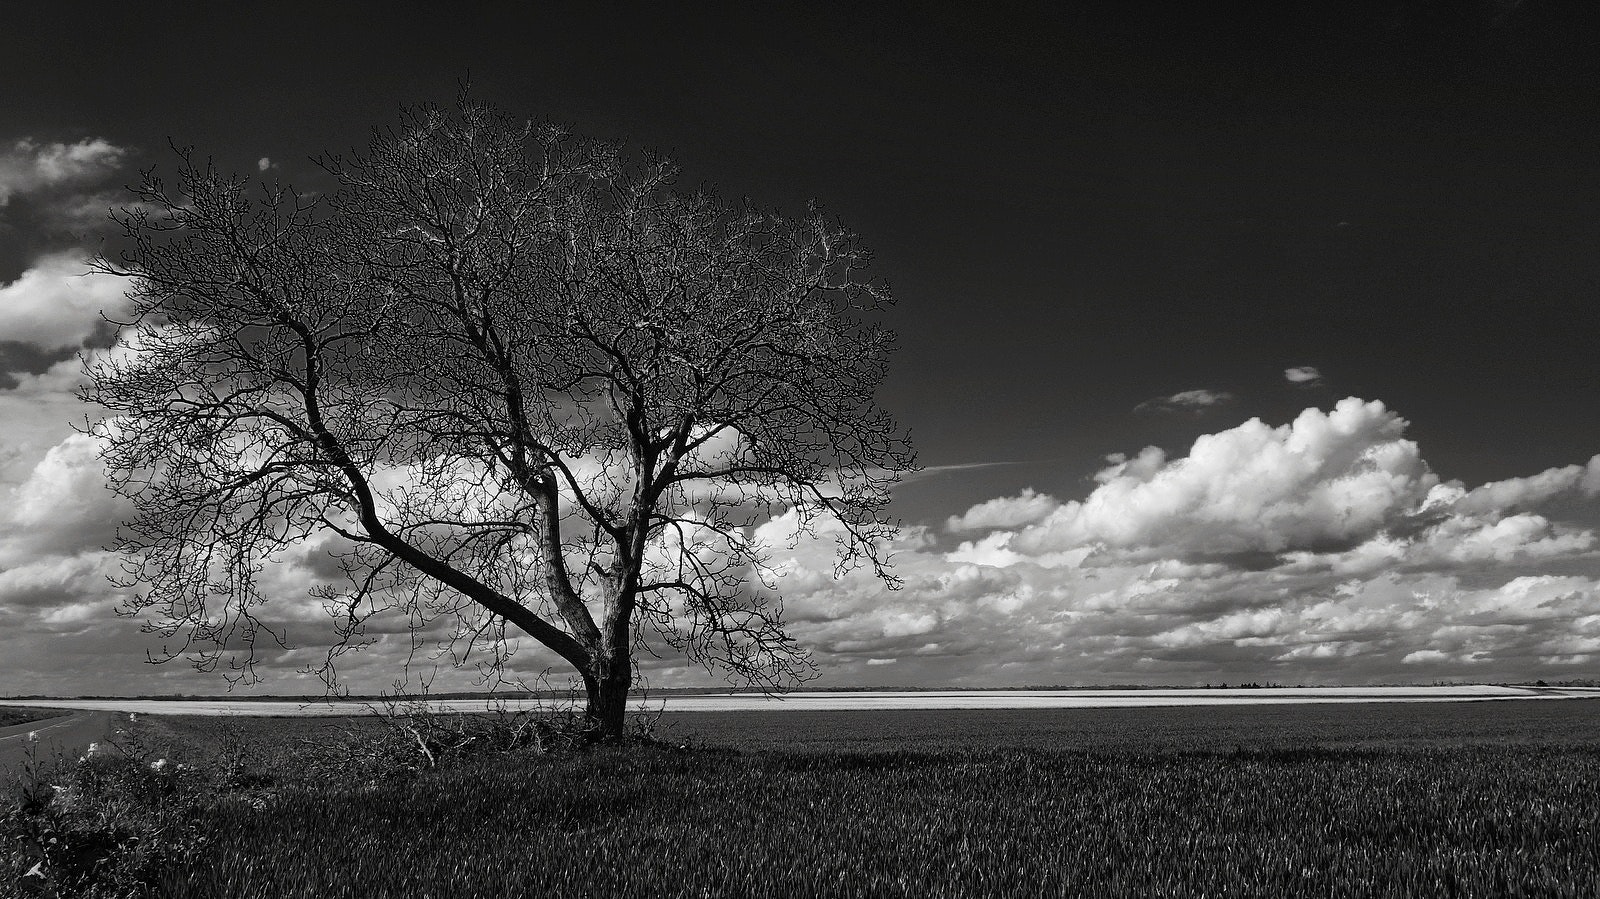 Gray scale photo of leafless tree under cloudy sky